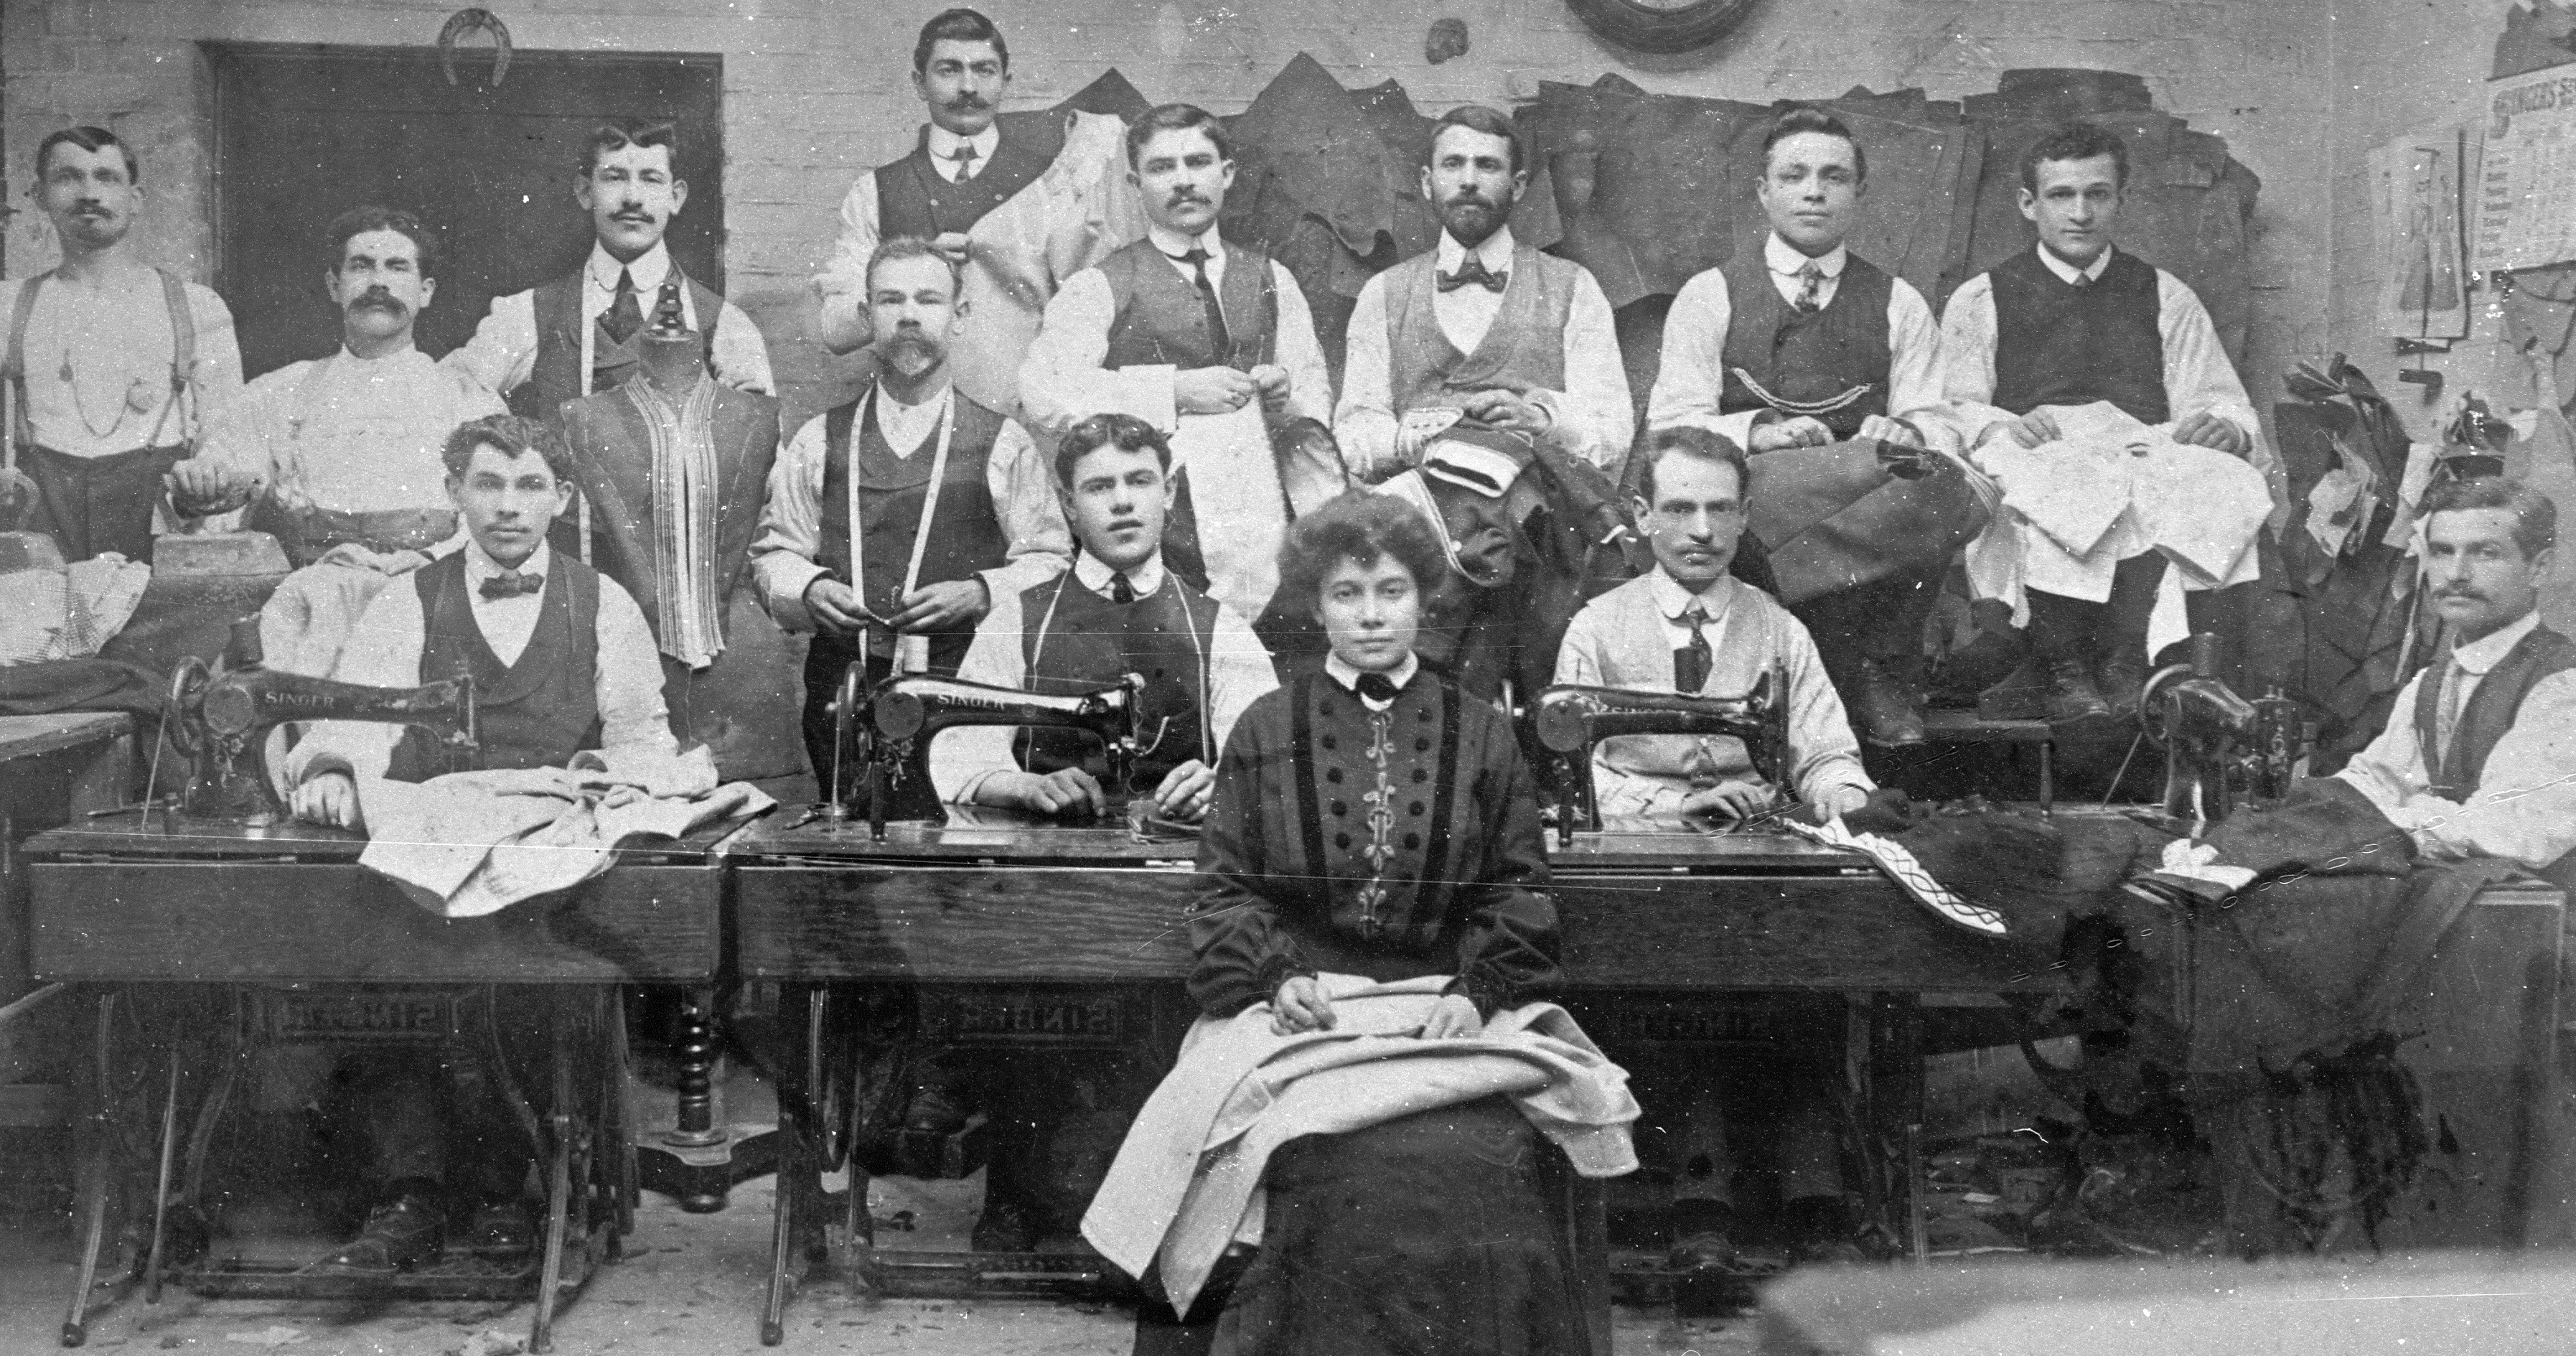 B&w photo of sewing workshop woman in front and men behind